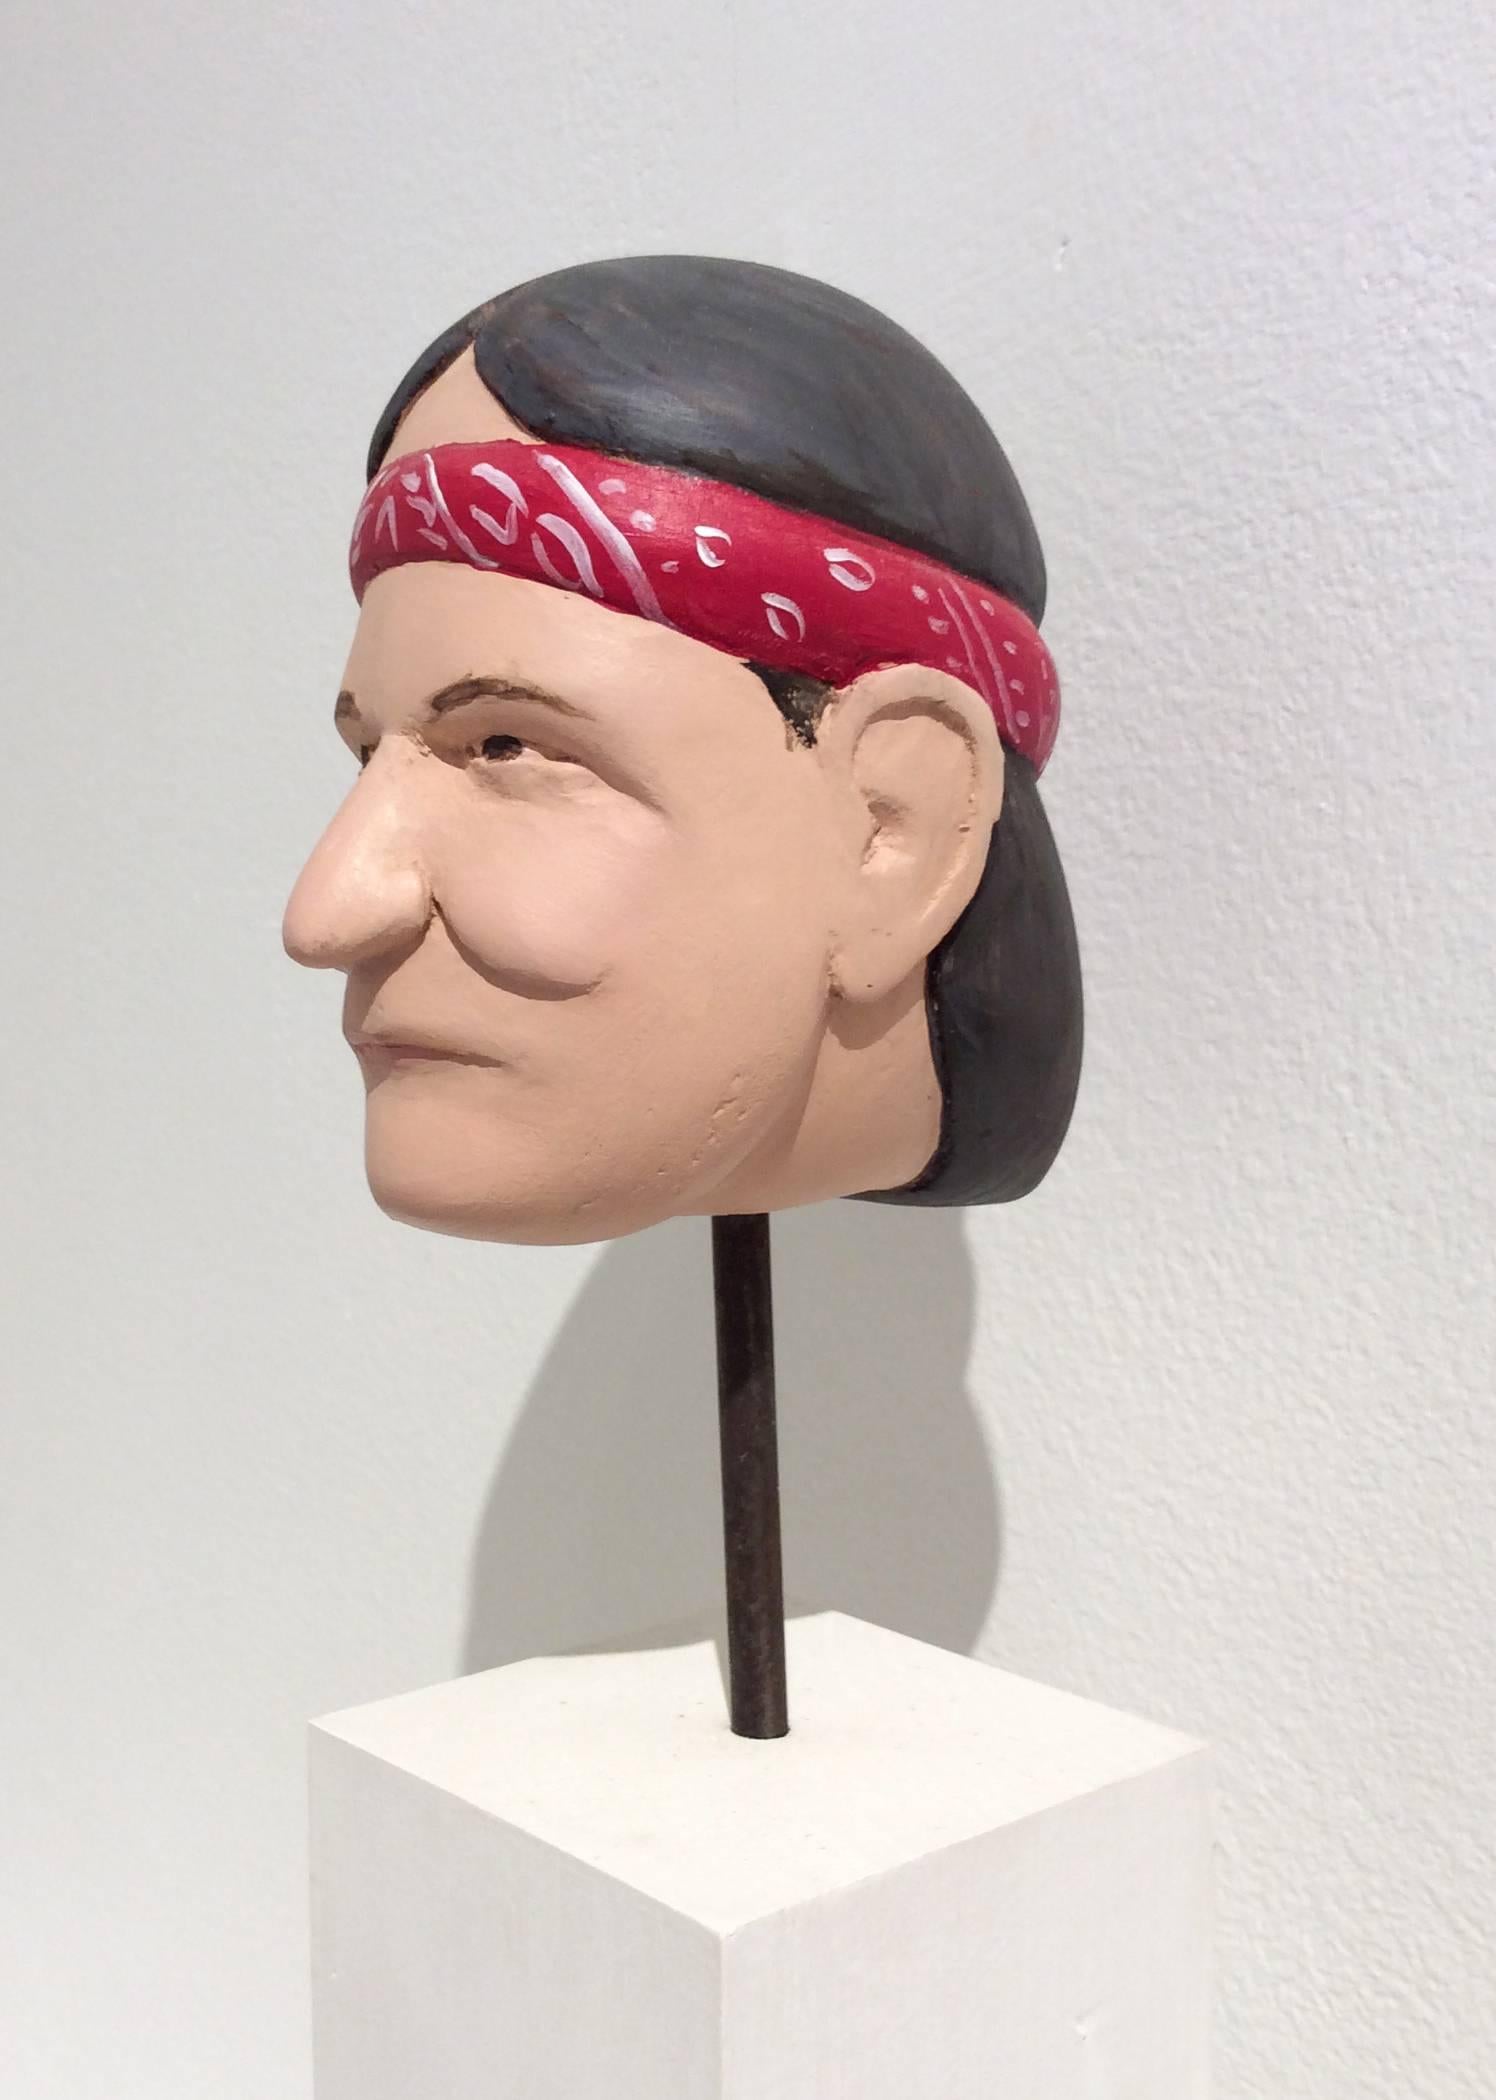 Willie Nelson (Carved Wooden bust of Willie Nelson on Pedestal w/ Red Bandanna) - Sculpture by John Cross